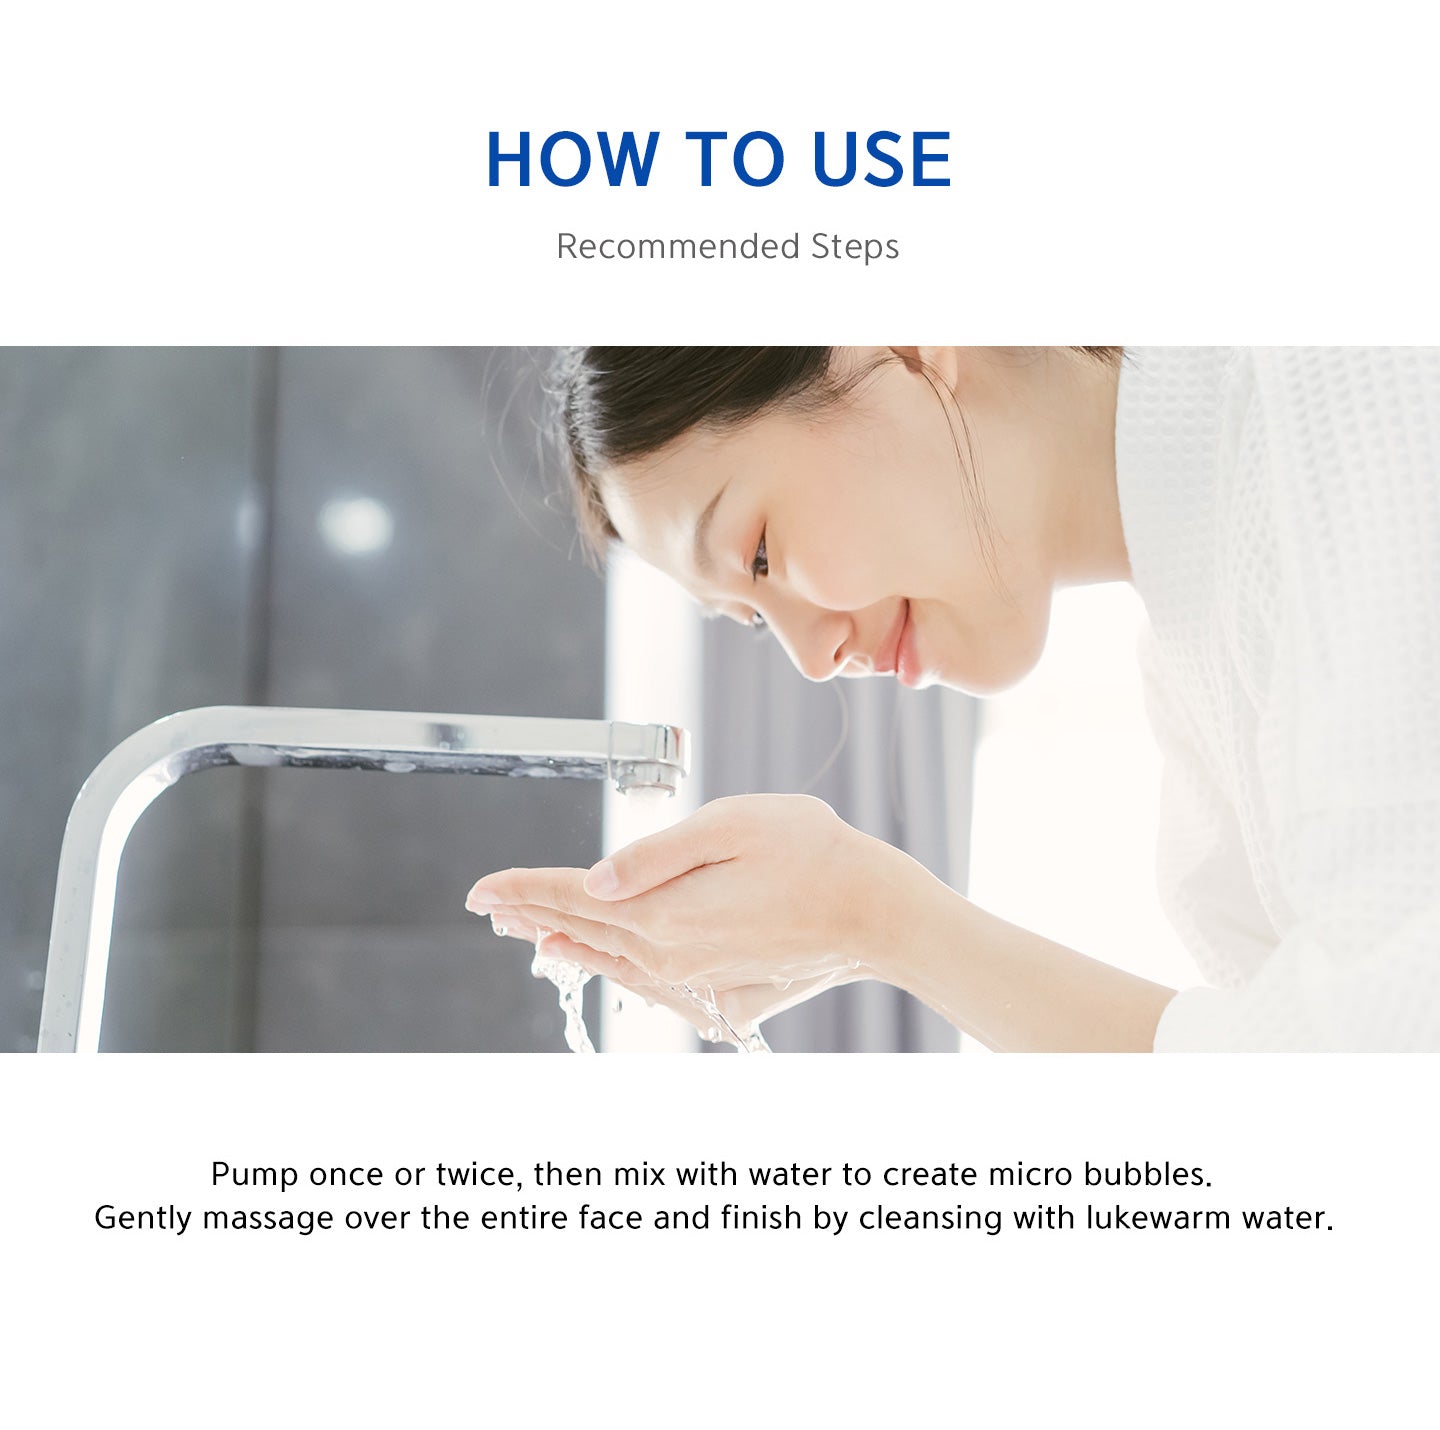 How to use? Pump once or twice, then mix with water to create micro bubbles. Gently massage over the entire face and finish by cleansing with lukewarm water. 